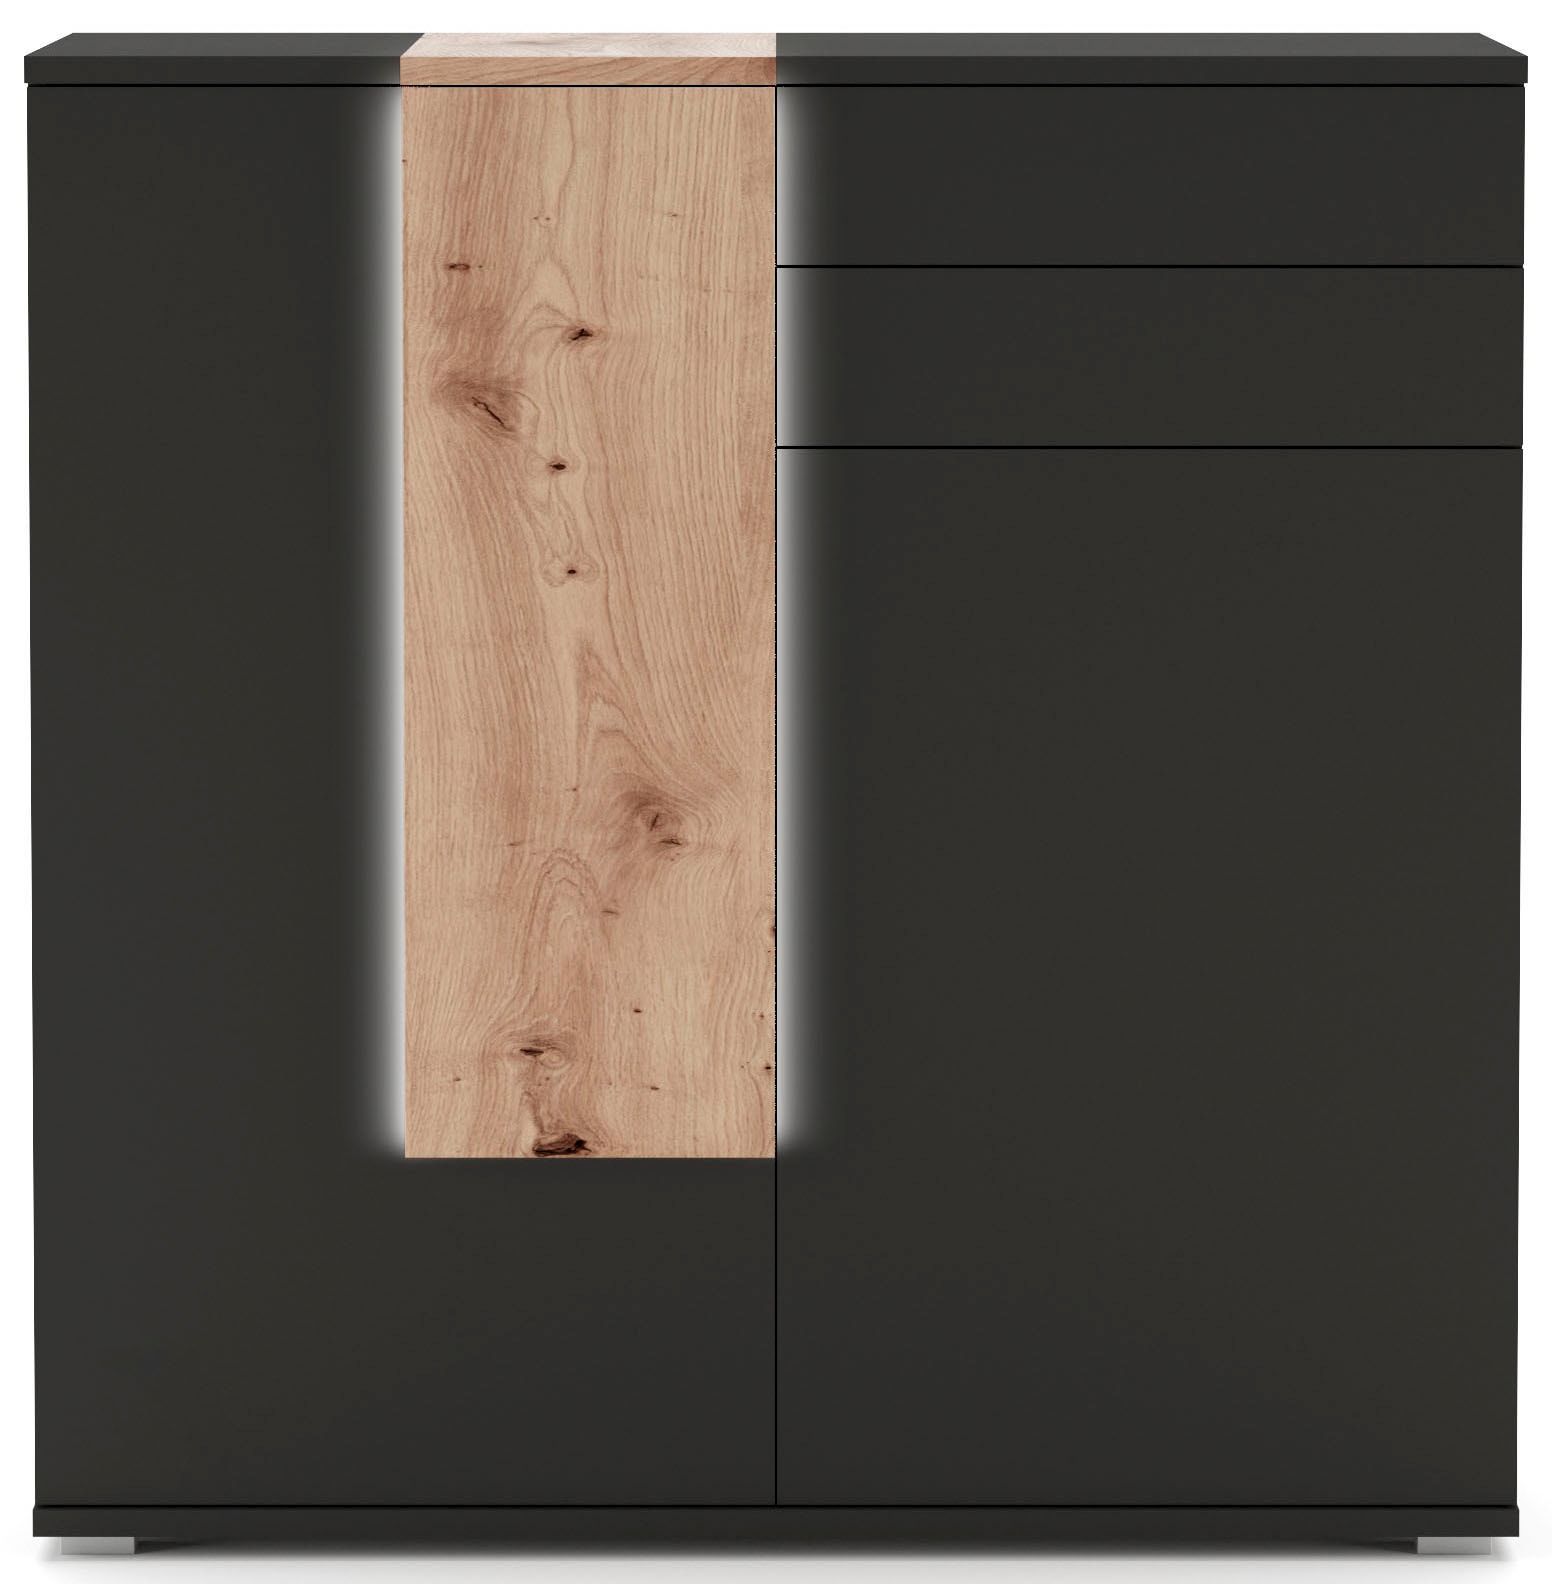 COTTA Highboard »Montana«, inkl. LED-Beleuchtung, mit Push-To-Open, Breite 120 cm